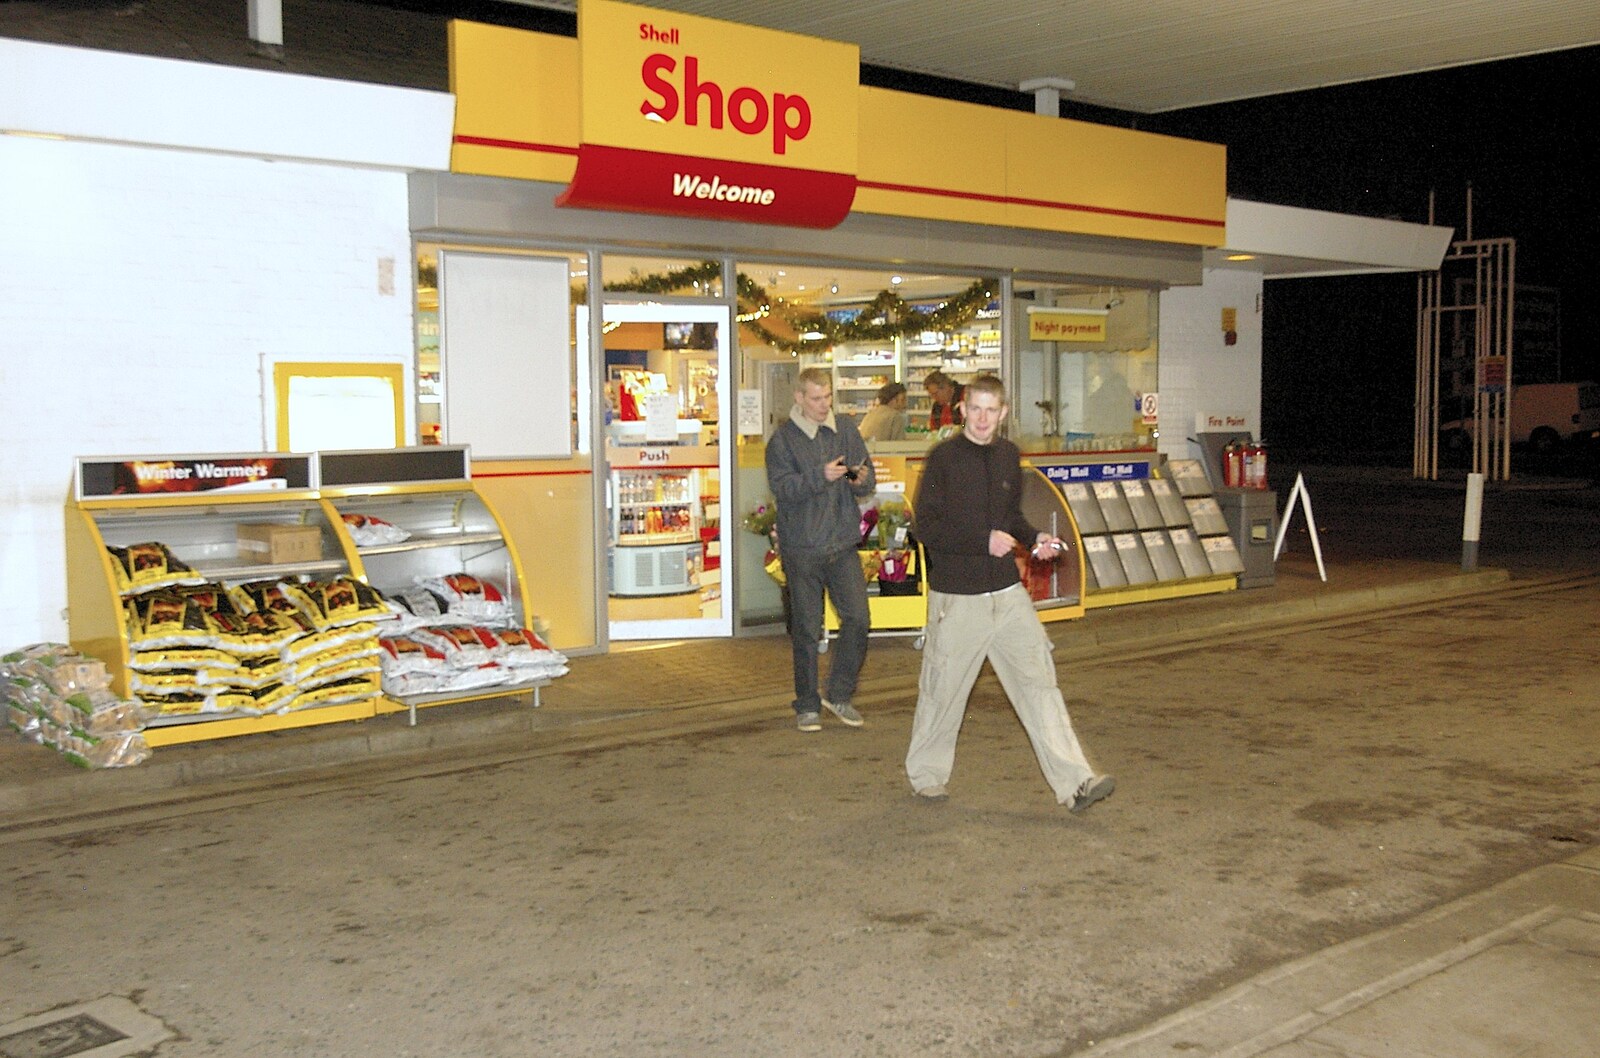 A trip to the petrol-station shop on Victoria Road from Most Haunted, and Music at Bar 13 and the Cherry Tree, Mellis - 26th November 2005